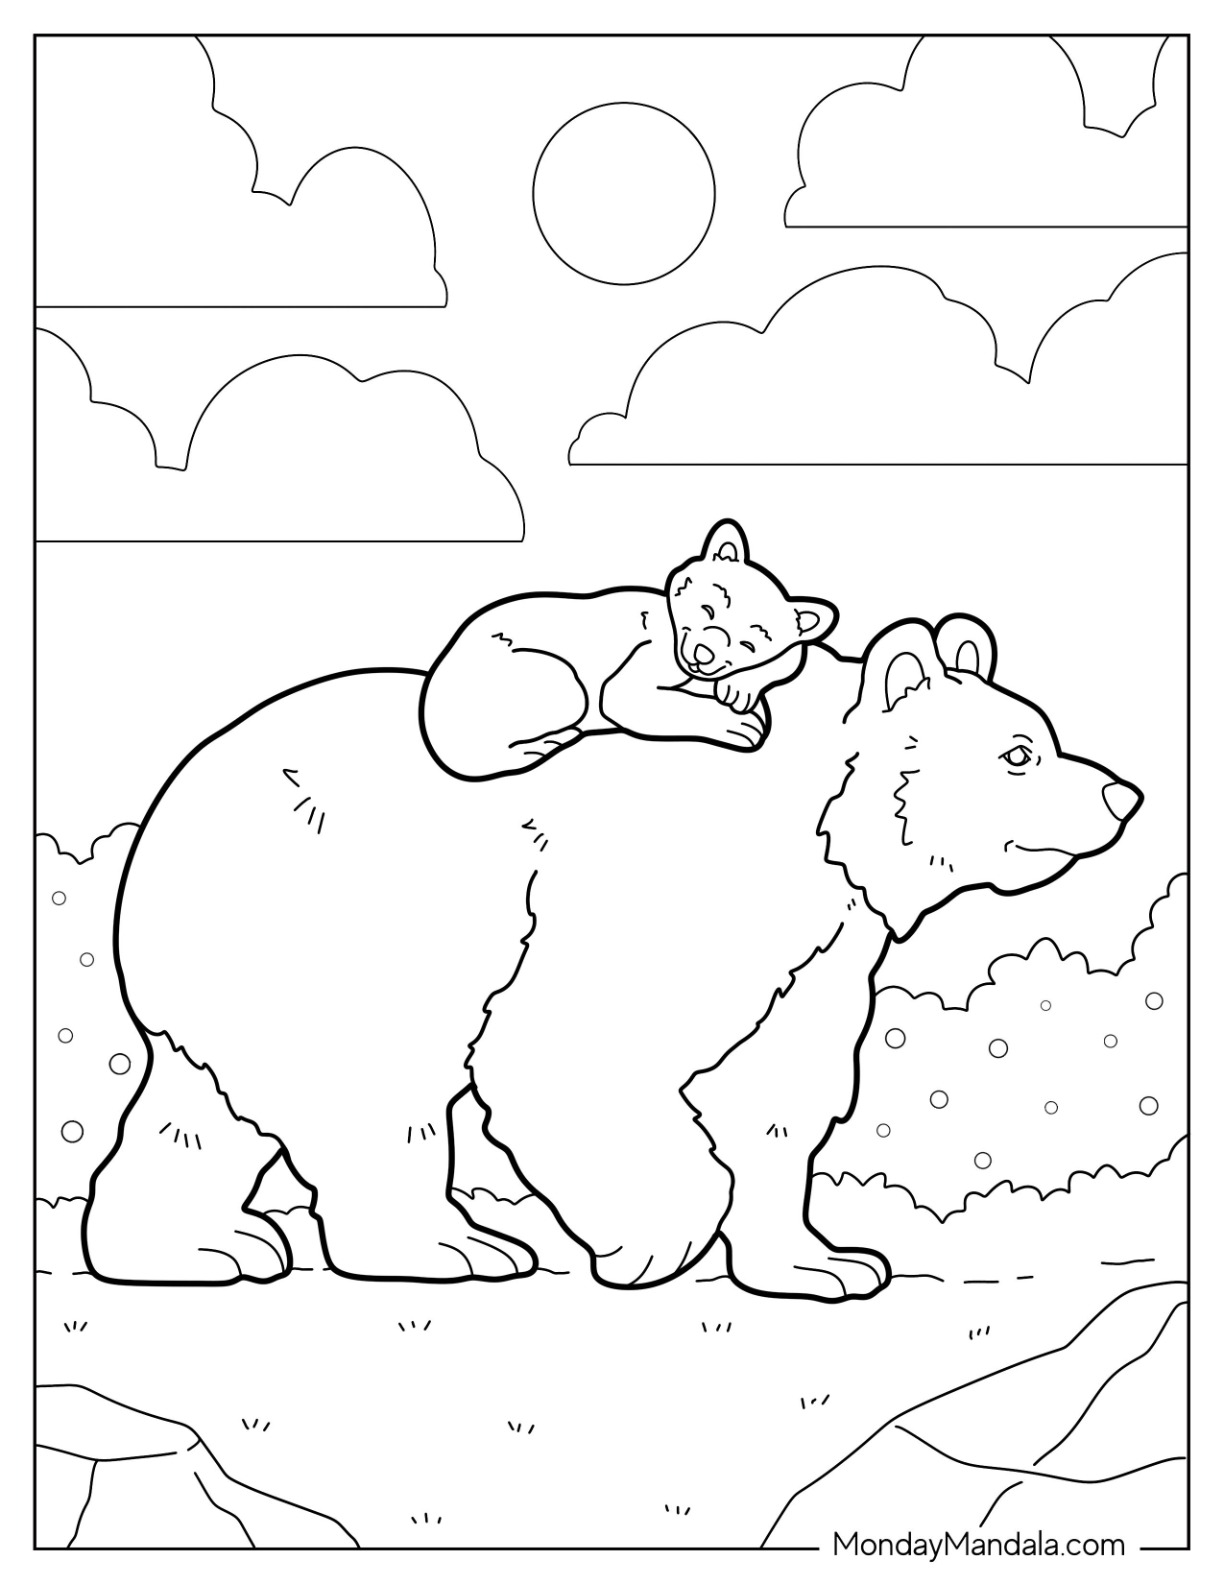 Bear coloring pages free pdf printables